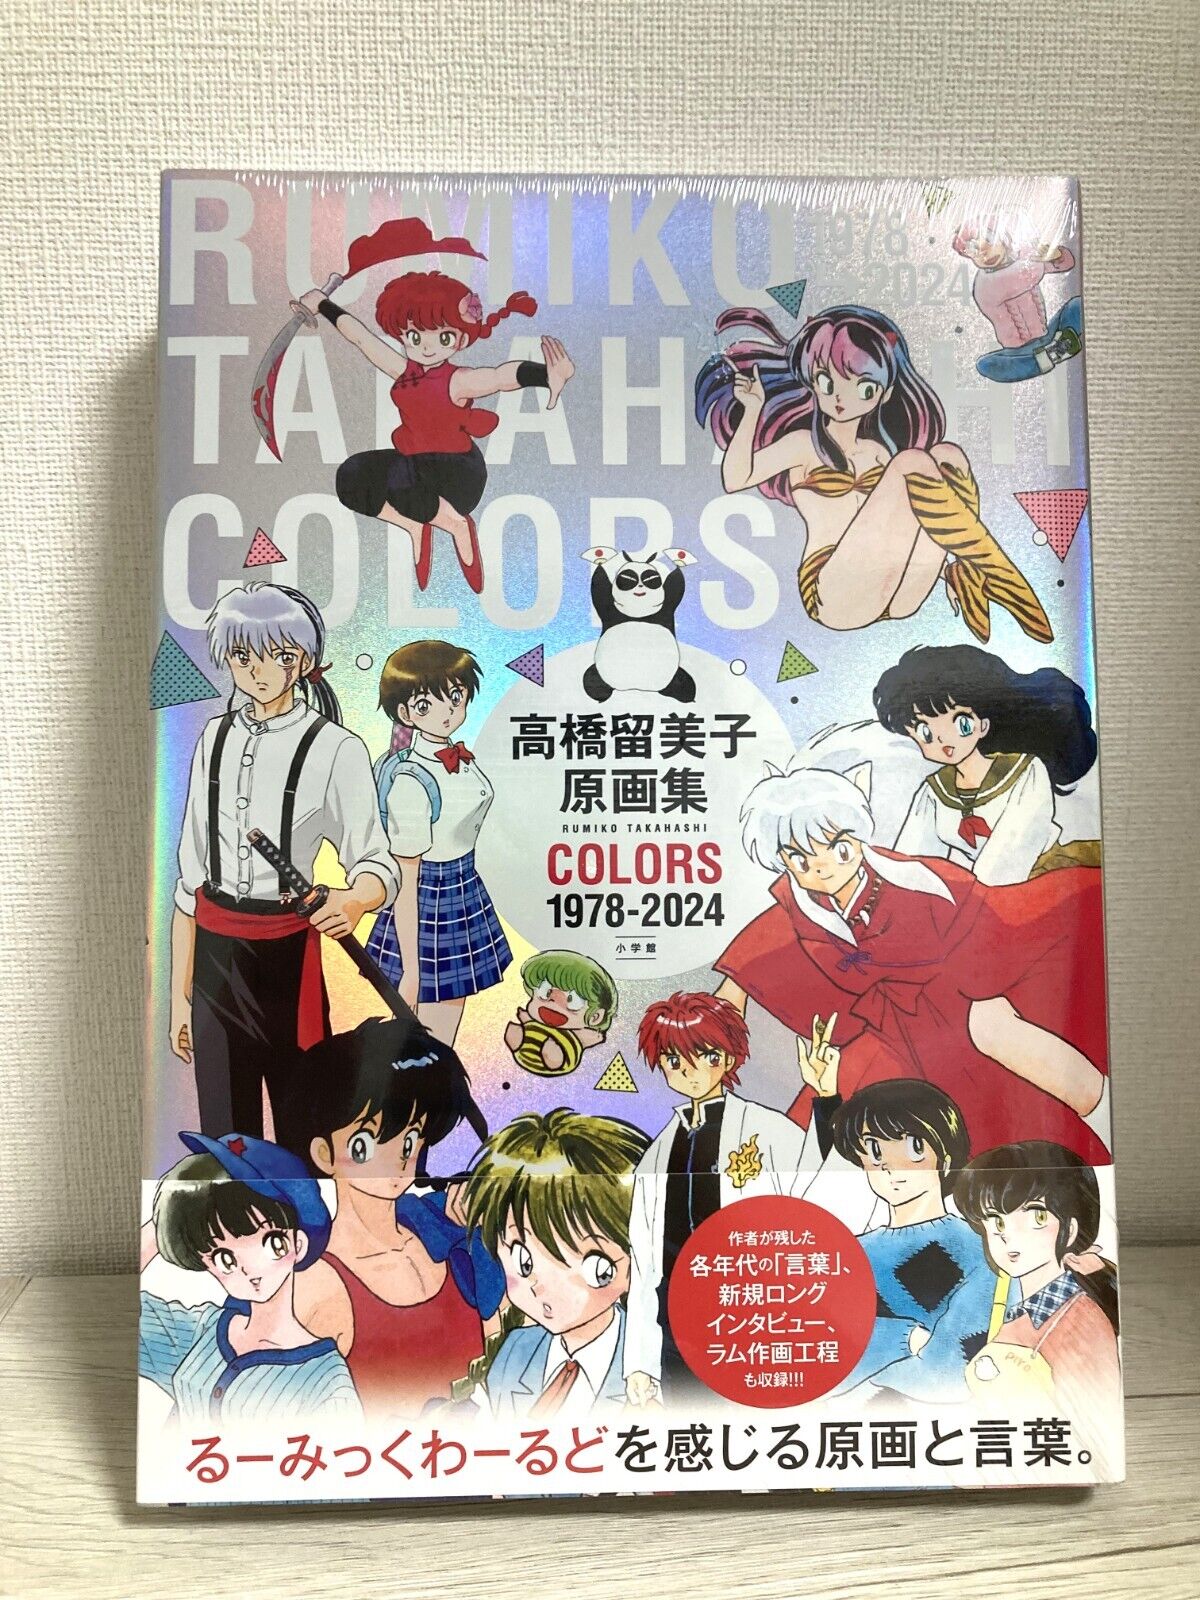 Rumiko Takahashi Art Works COLORS 1978 - 2024 Book shipping from Japan NEW